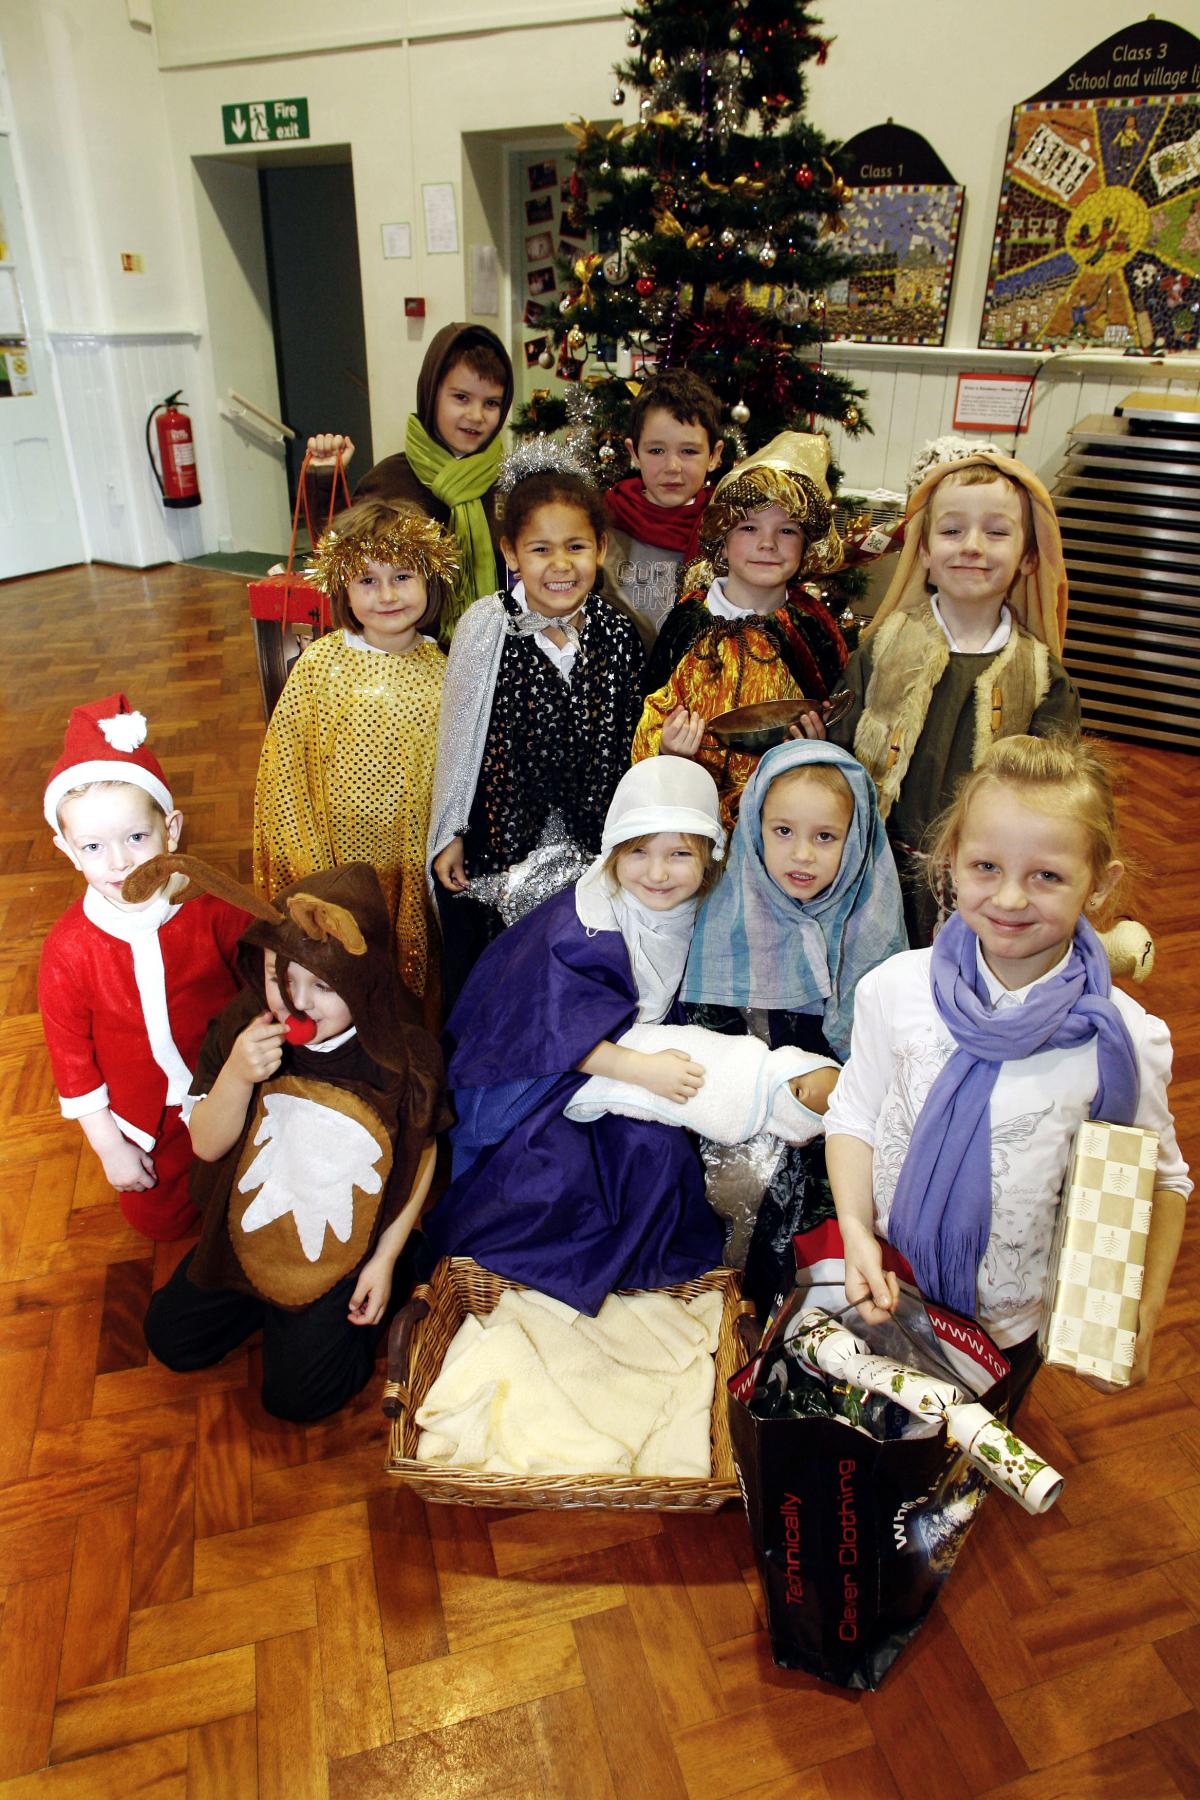 Lees Primary School pupils in their production What Is Christmas?